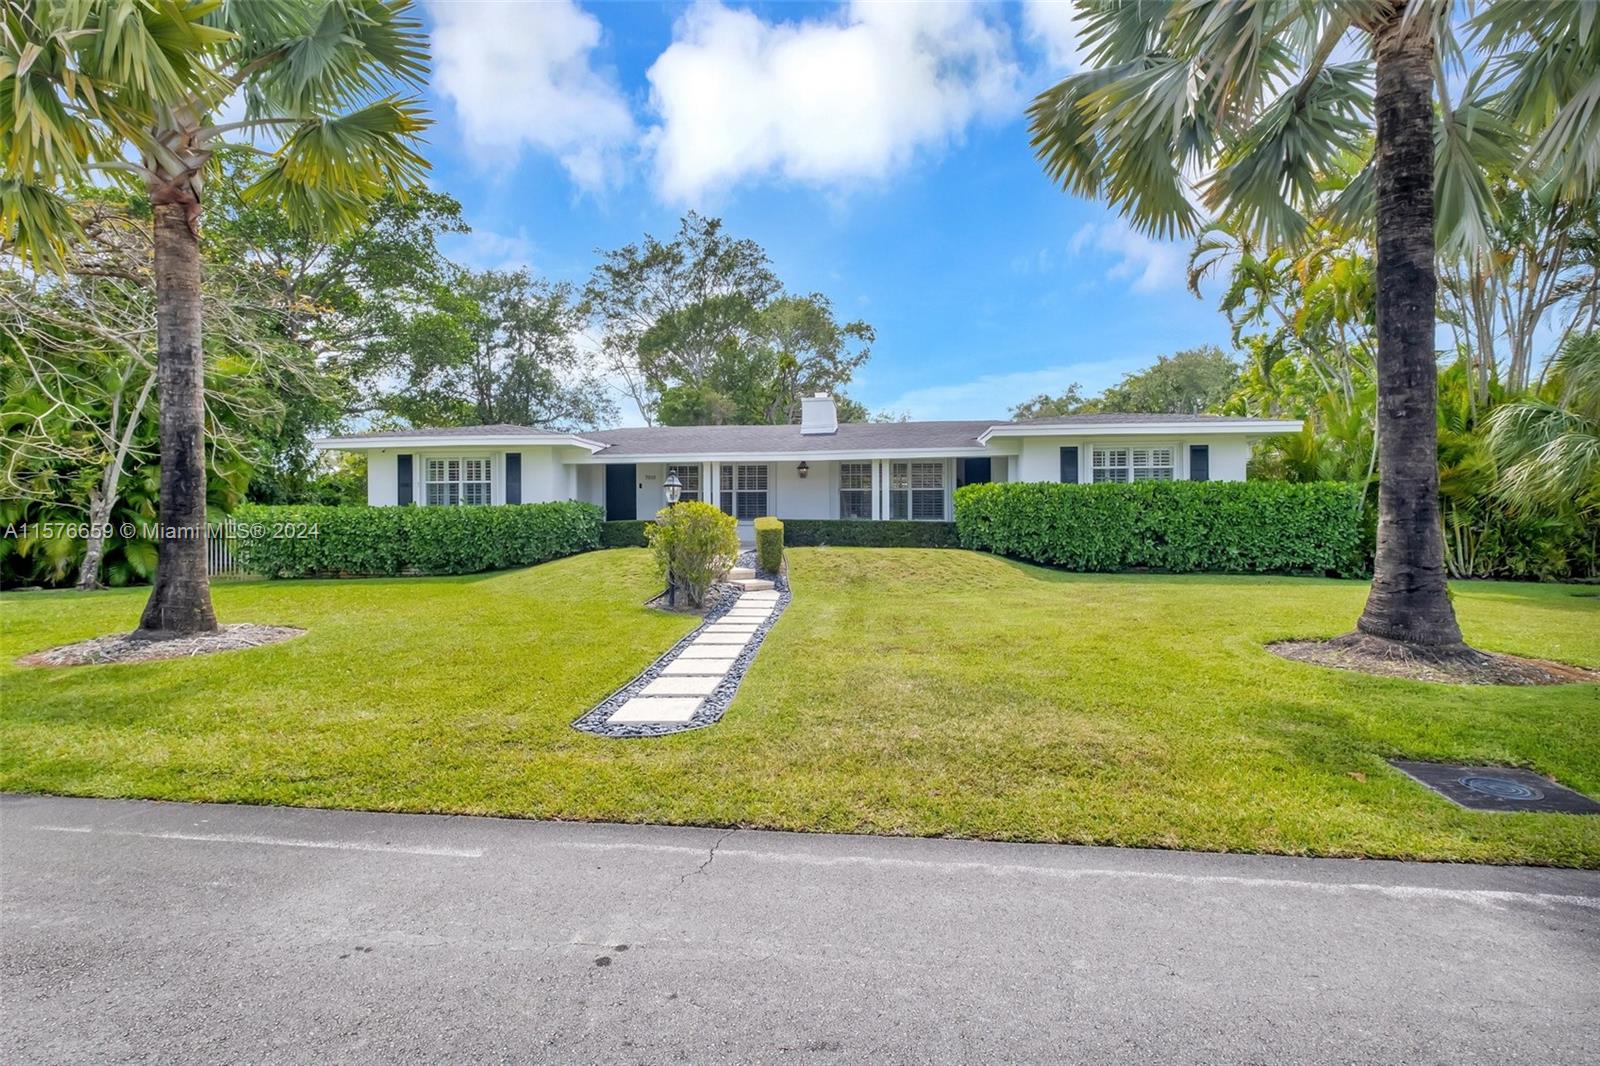 RARE FIND IN S. MIAMI. LARGE LOT PLUS 1/8 INTEREST IN PARK DIRECTLY IN FRONT. QUIET LOW TRAFFIC CIRCLE. TOTALLY RENOVATED HOME WITH THREE BEDROOMS PLUS DEN/OFFICE,  EAT-IN KITCHEN, FAMILY ROOM, 1 CAR GARAGE, SCREENED PORCH AND PATIO. INSIDE LAUNDRY ROOM. FORMAL LIVING ROOM WITH FIREPLACE. ROOM FOR POOL.